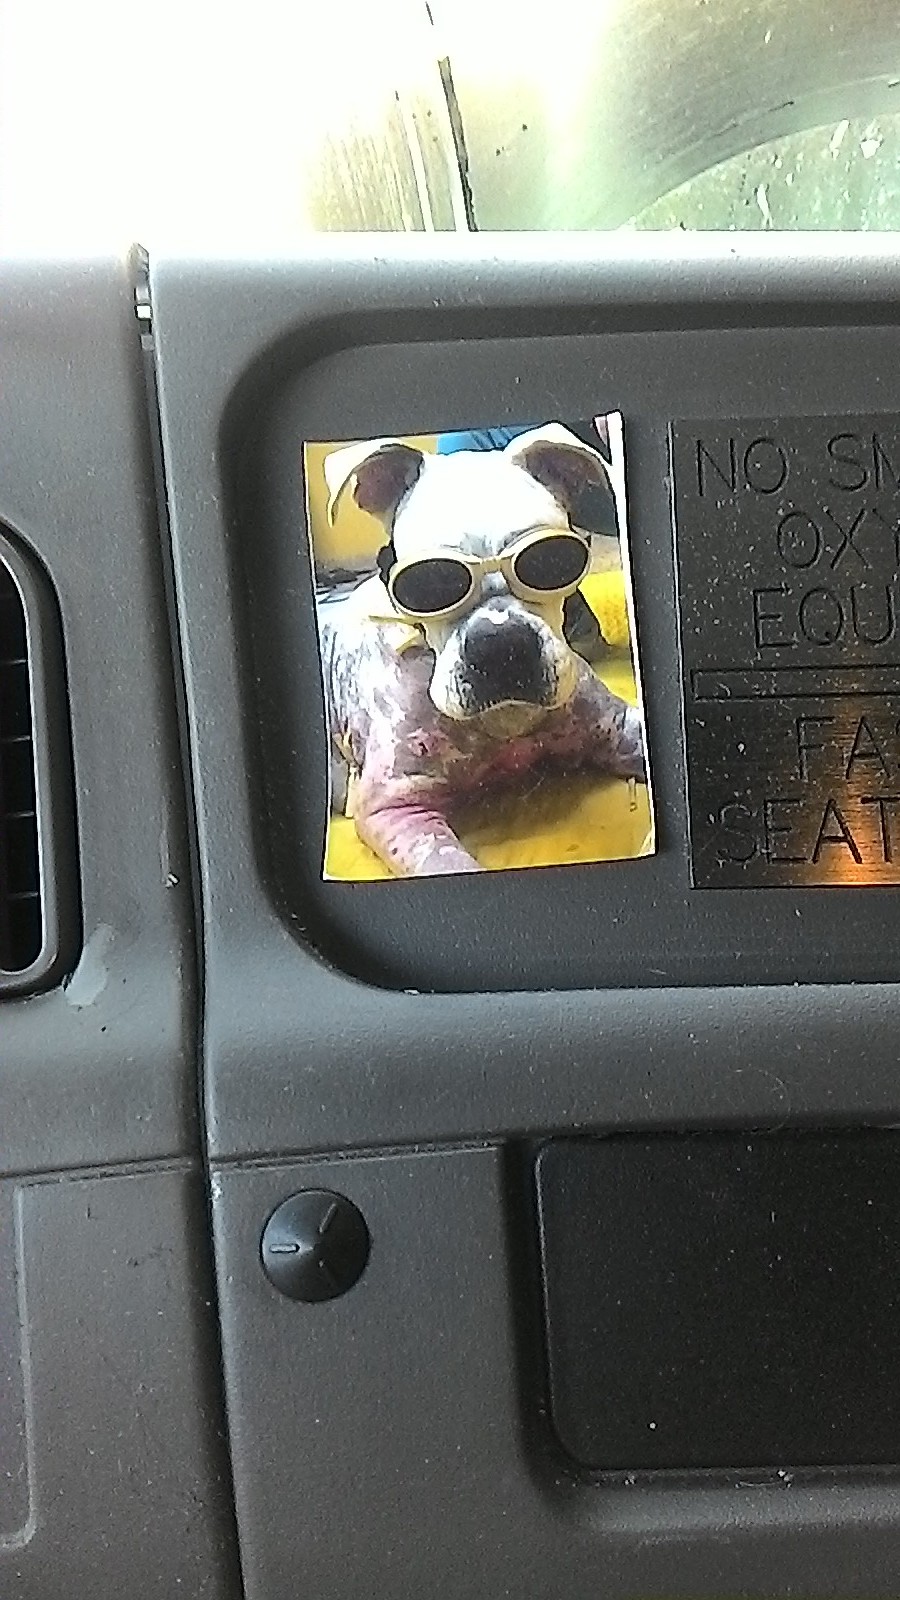 Cheryl Brady has a photo of Toby pasted on the dashboard of her ambulance as one of her company's success stories.